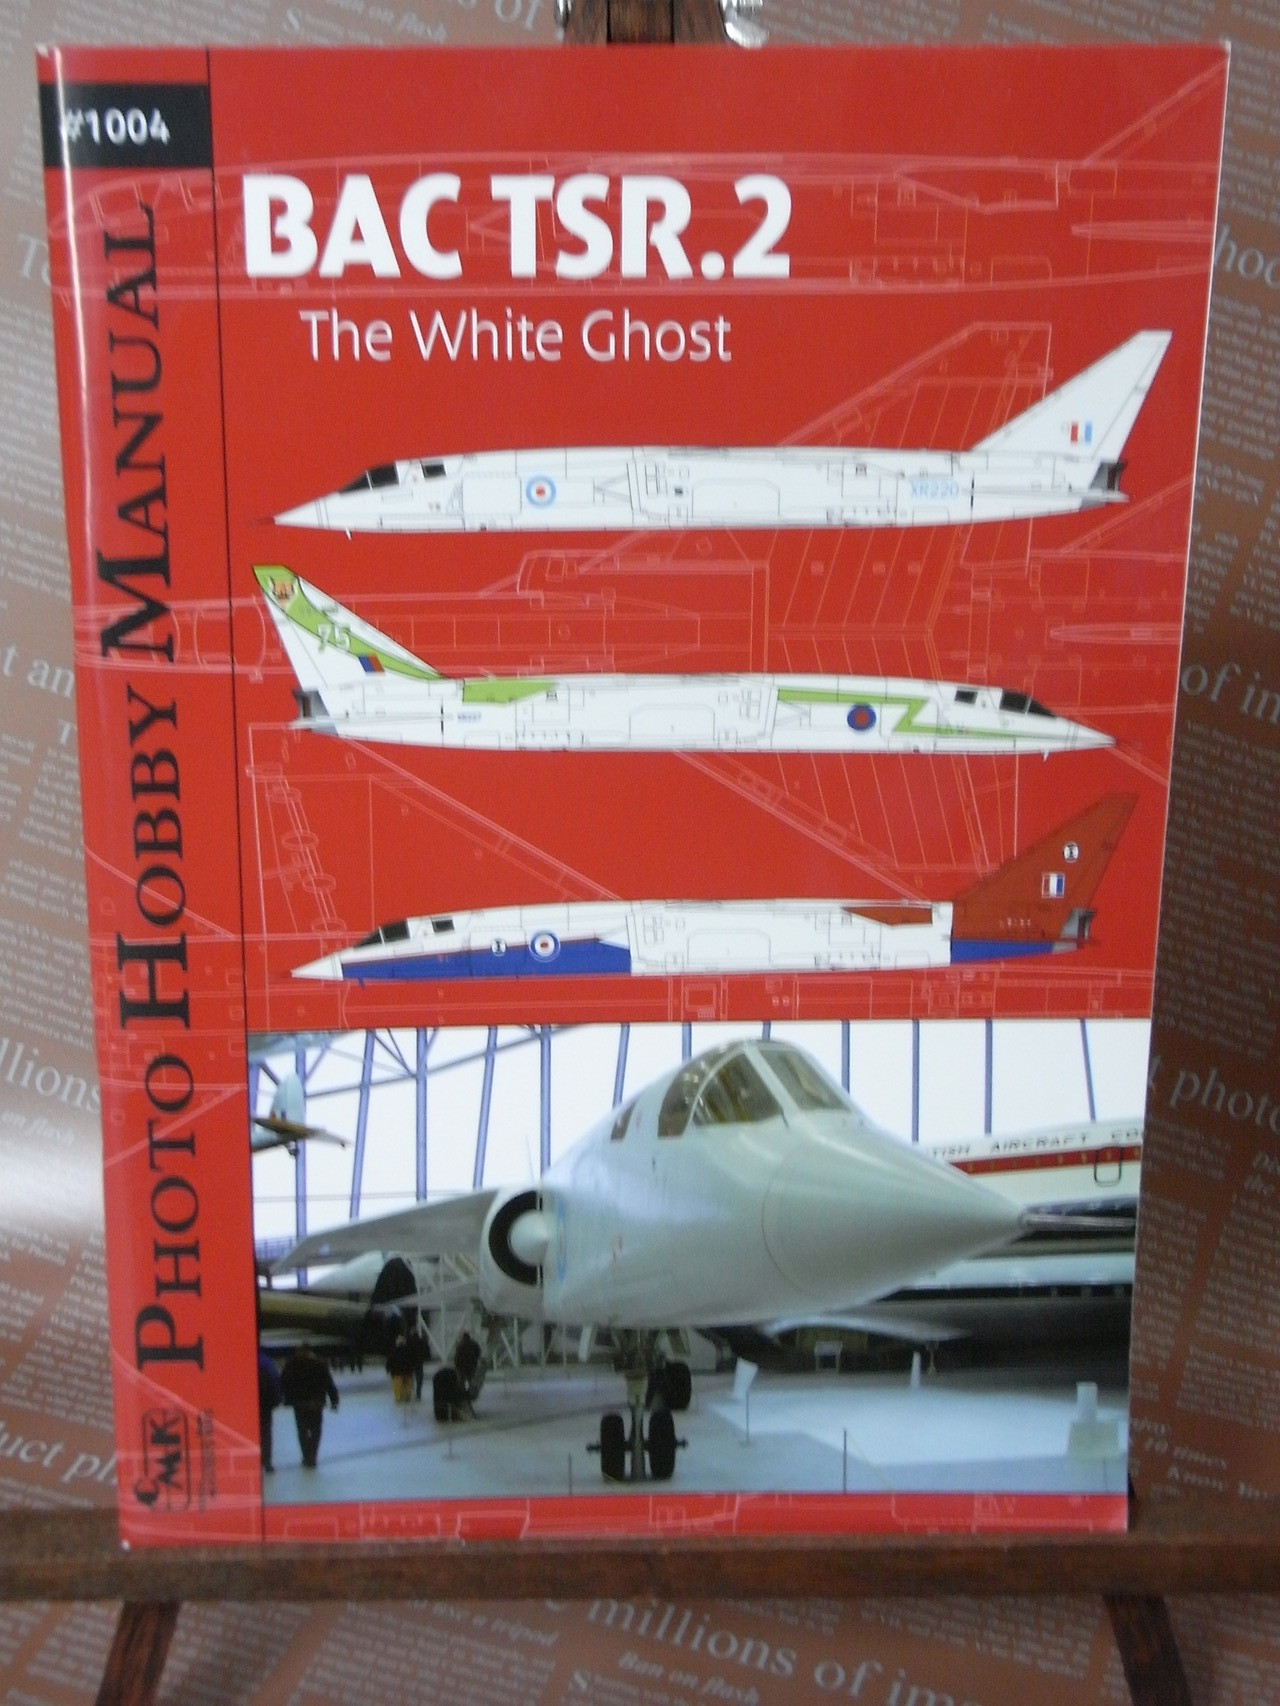 PHOTO HOBBY MANUAL #1004 BAC TSR.2 The White Ghost